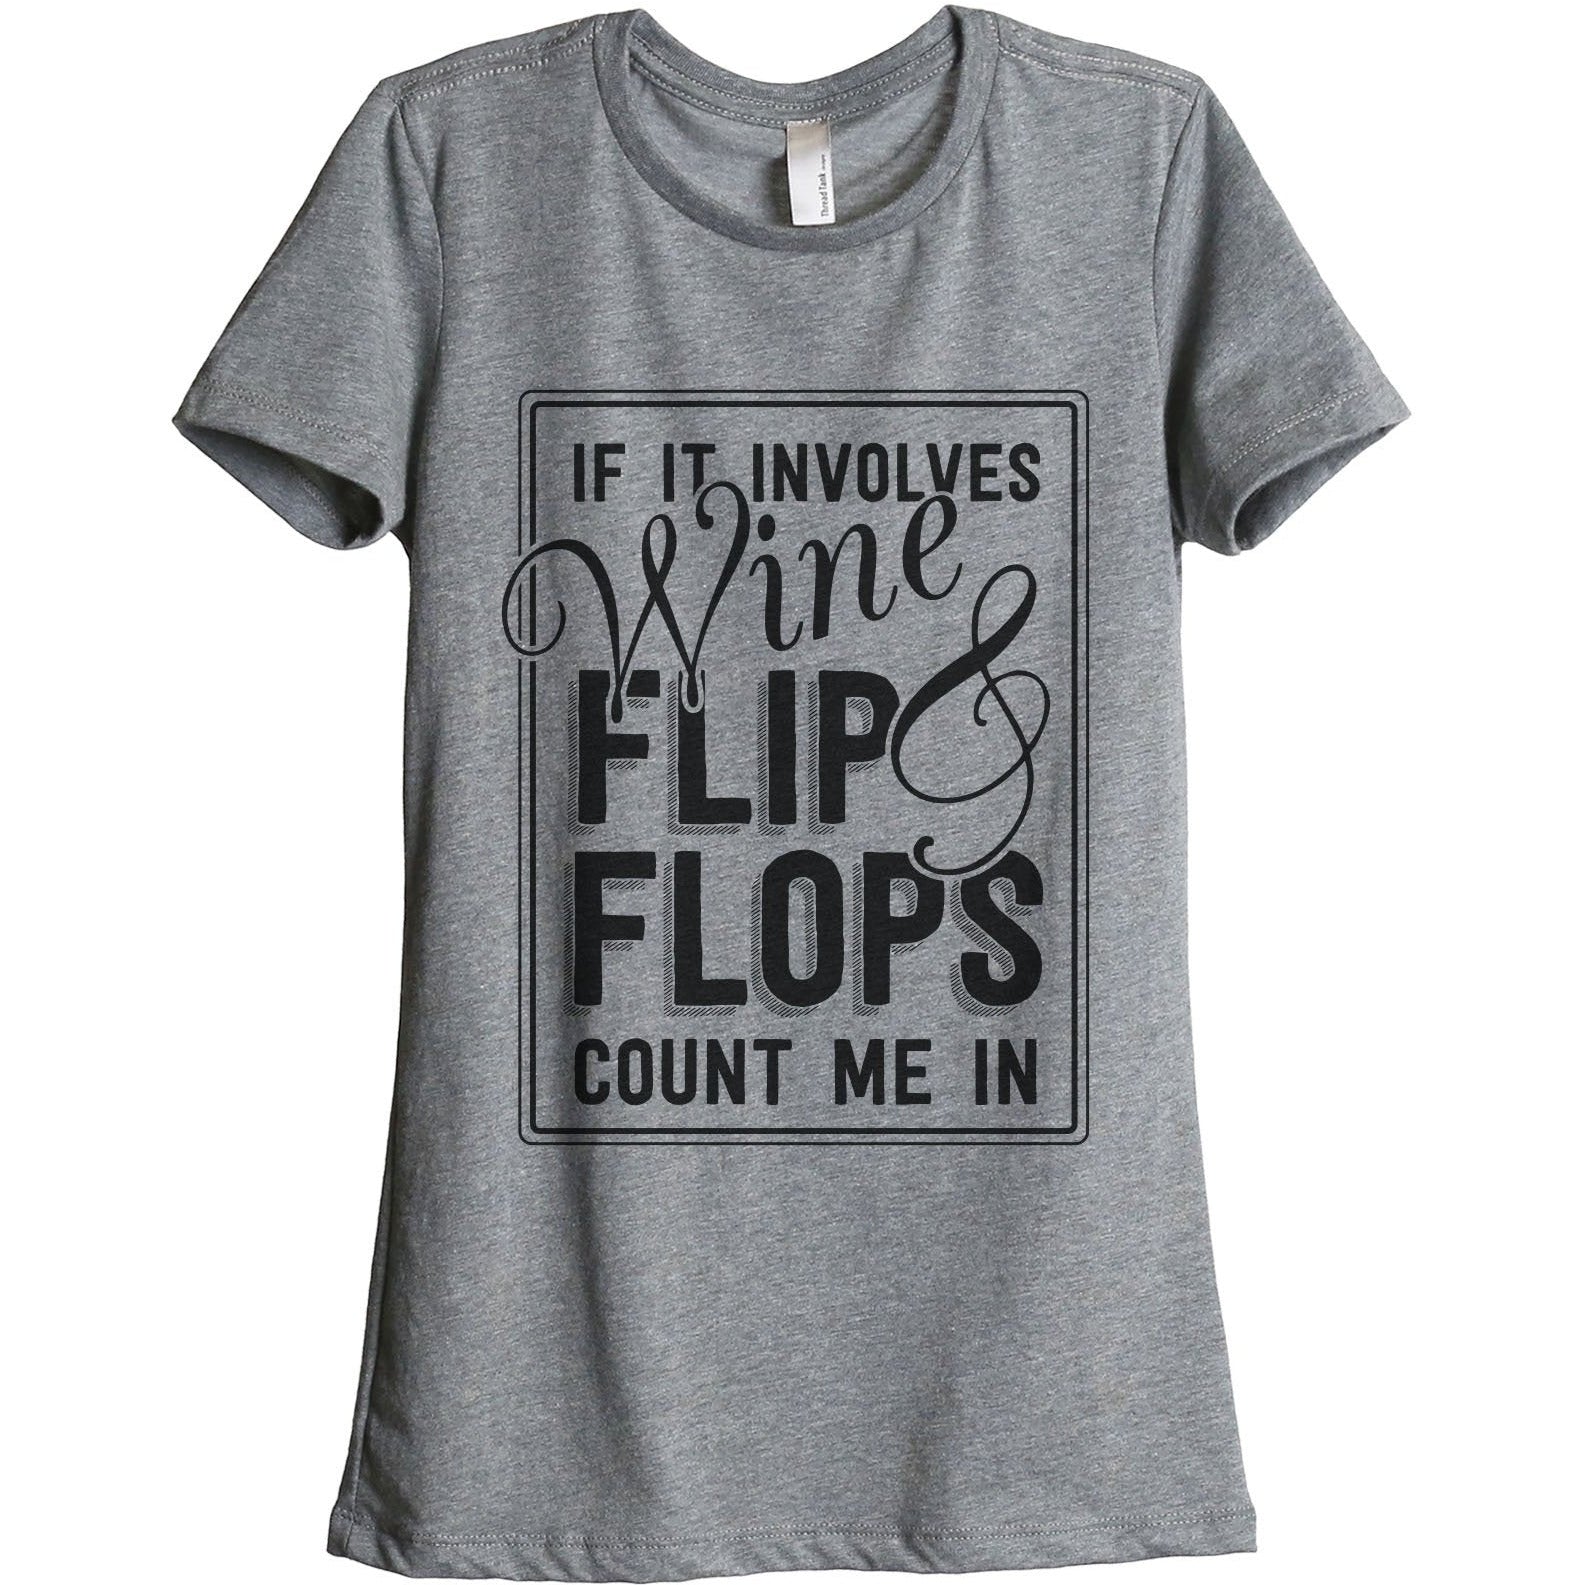 If It Involves Wine And Flip Flops Count Me In Women's Relaxed Crewneck T-Shirt Top Tee Heather Grey